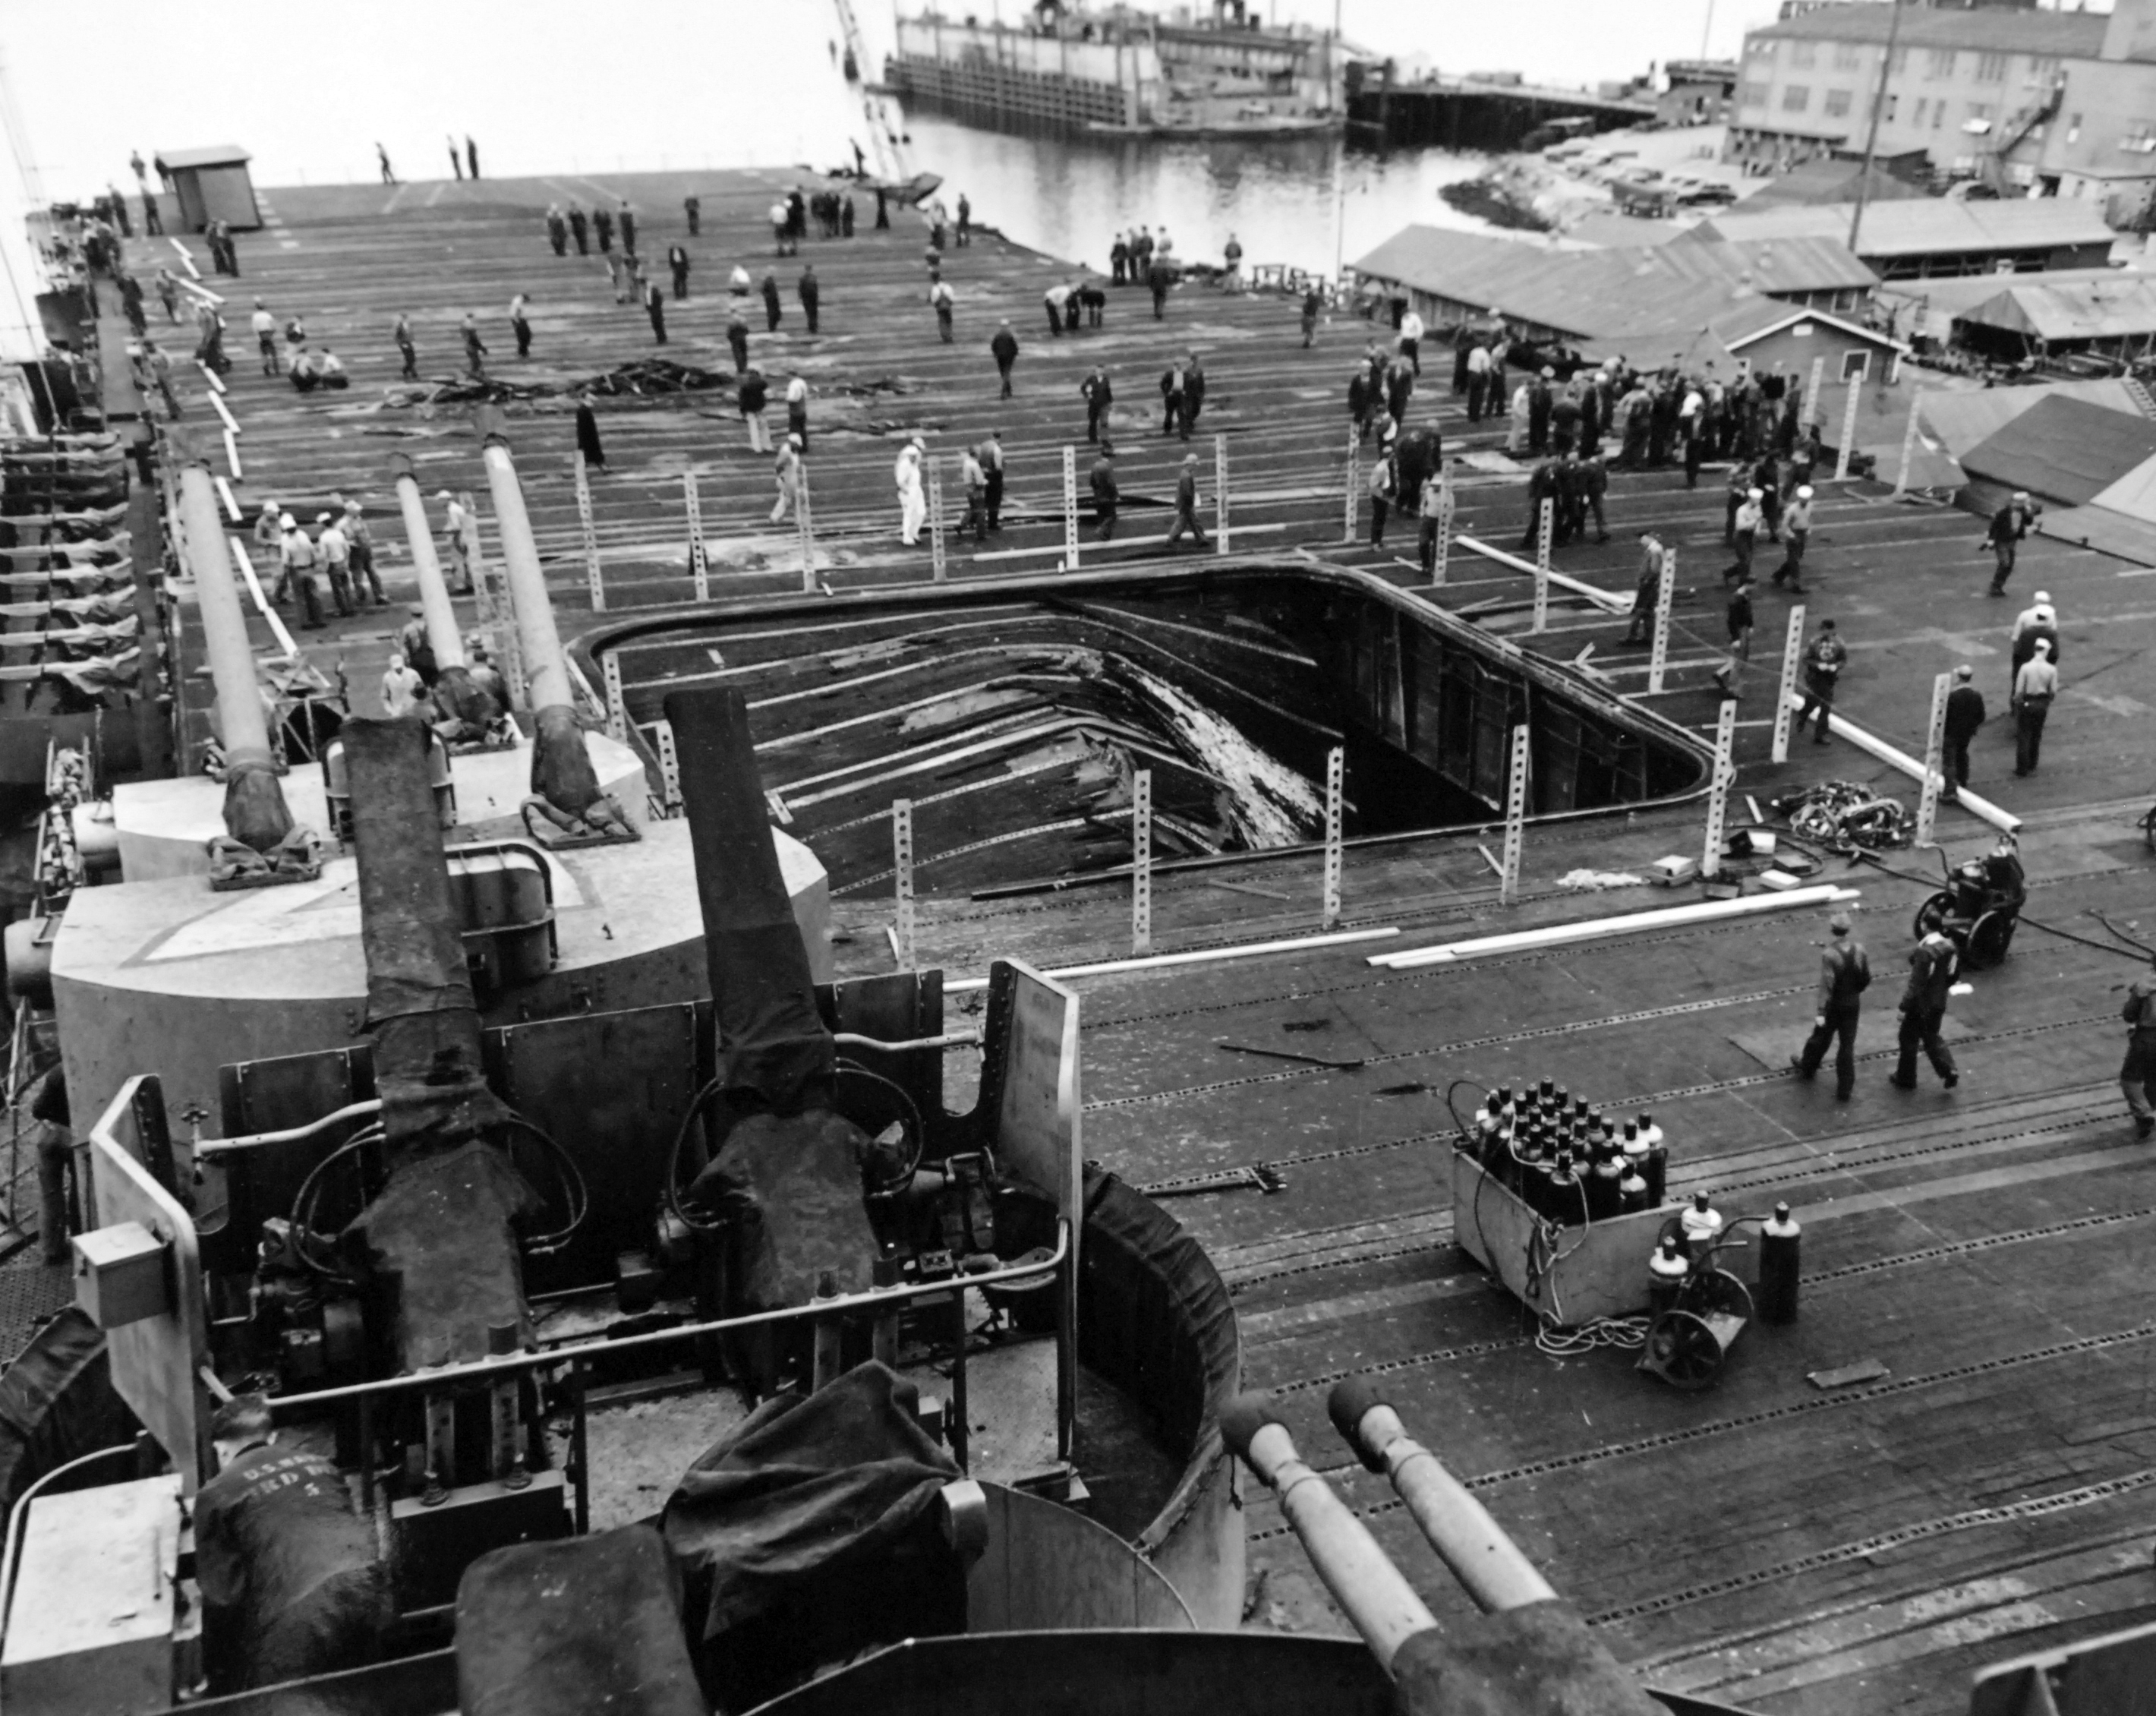 The after-flight deck of the USS Bunker Hill in Puget Sound Naval Shipyard’s Dry Dock No. 5 shortly after arriving at Bremerton, Washington, United States, 16 Jun 1945. Note the collapsed aircraft elevator.